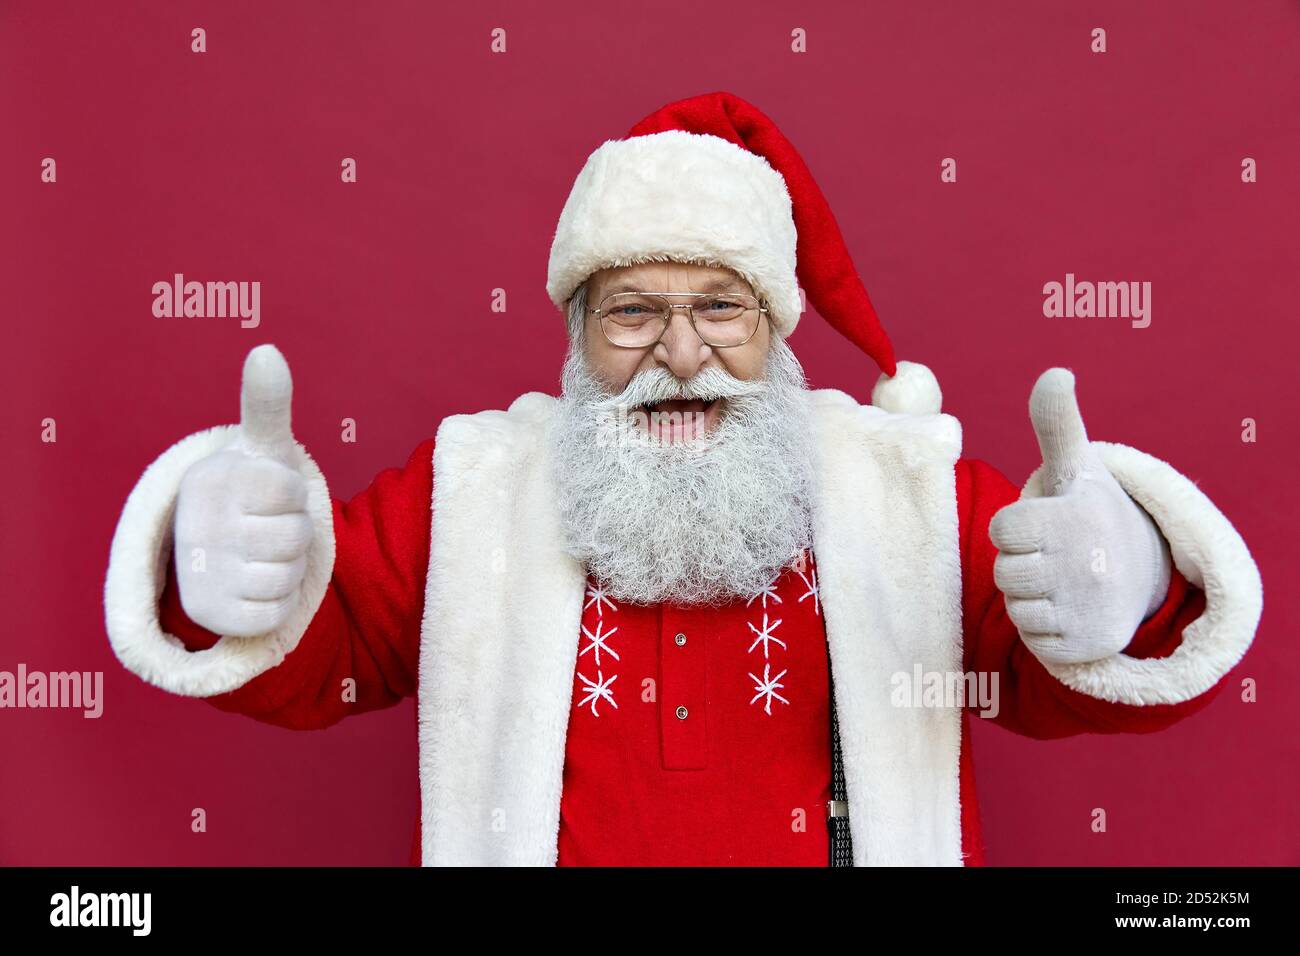 Happy Santa Claus showing thumbs up isolated on red background. Stock Photo